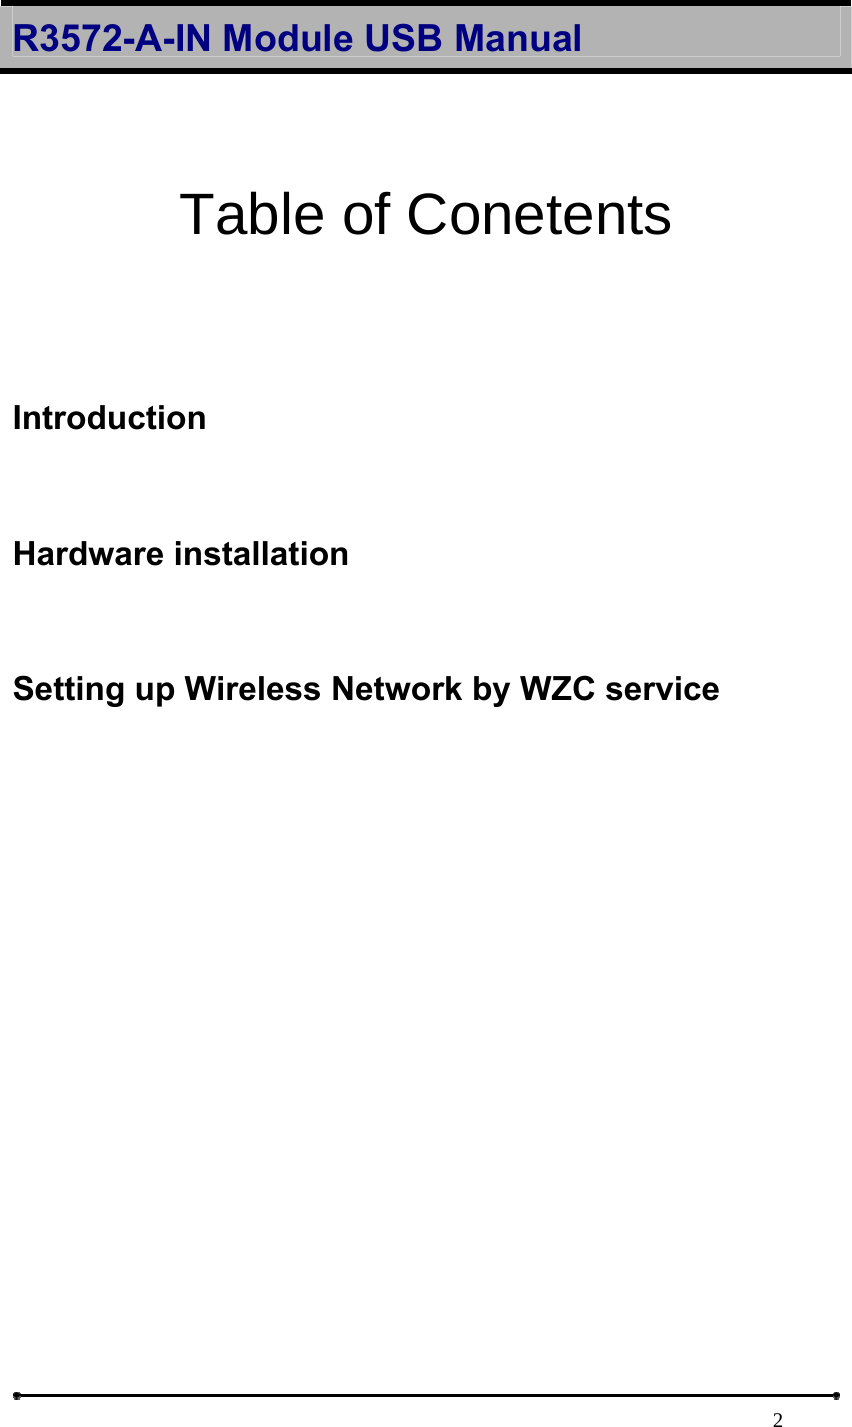 R3572-A-IN Module USB Manual                                                                            2 Table of Conetents  Introduction Hardware installation   Setting up Wireless Network by WZC service       